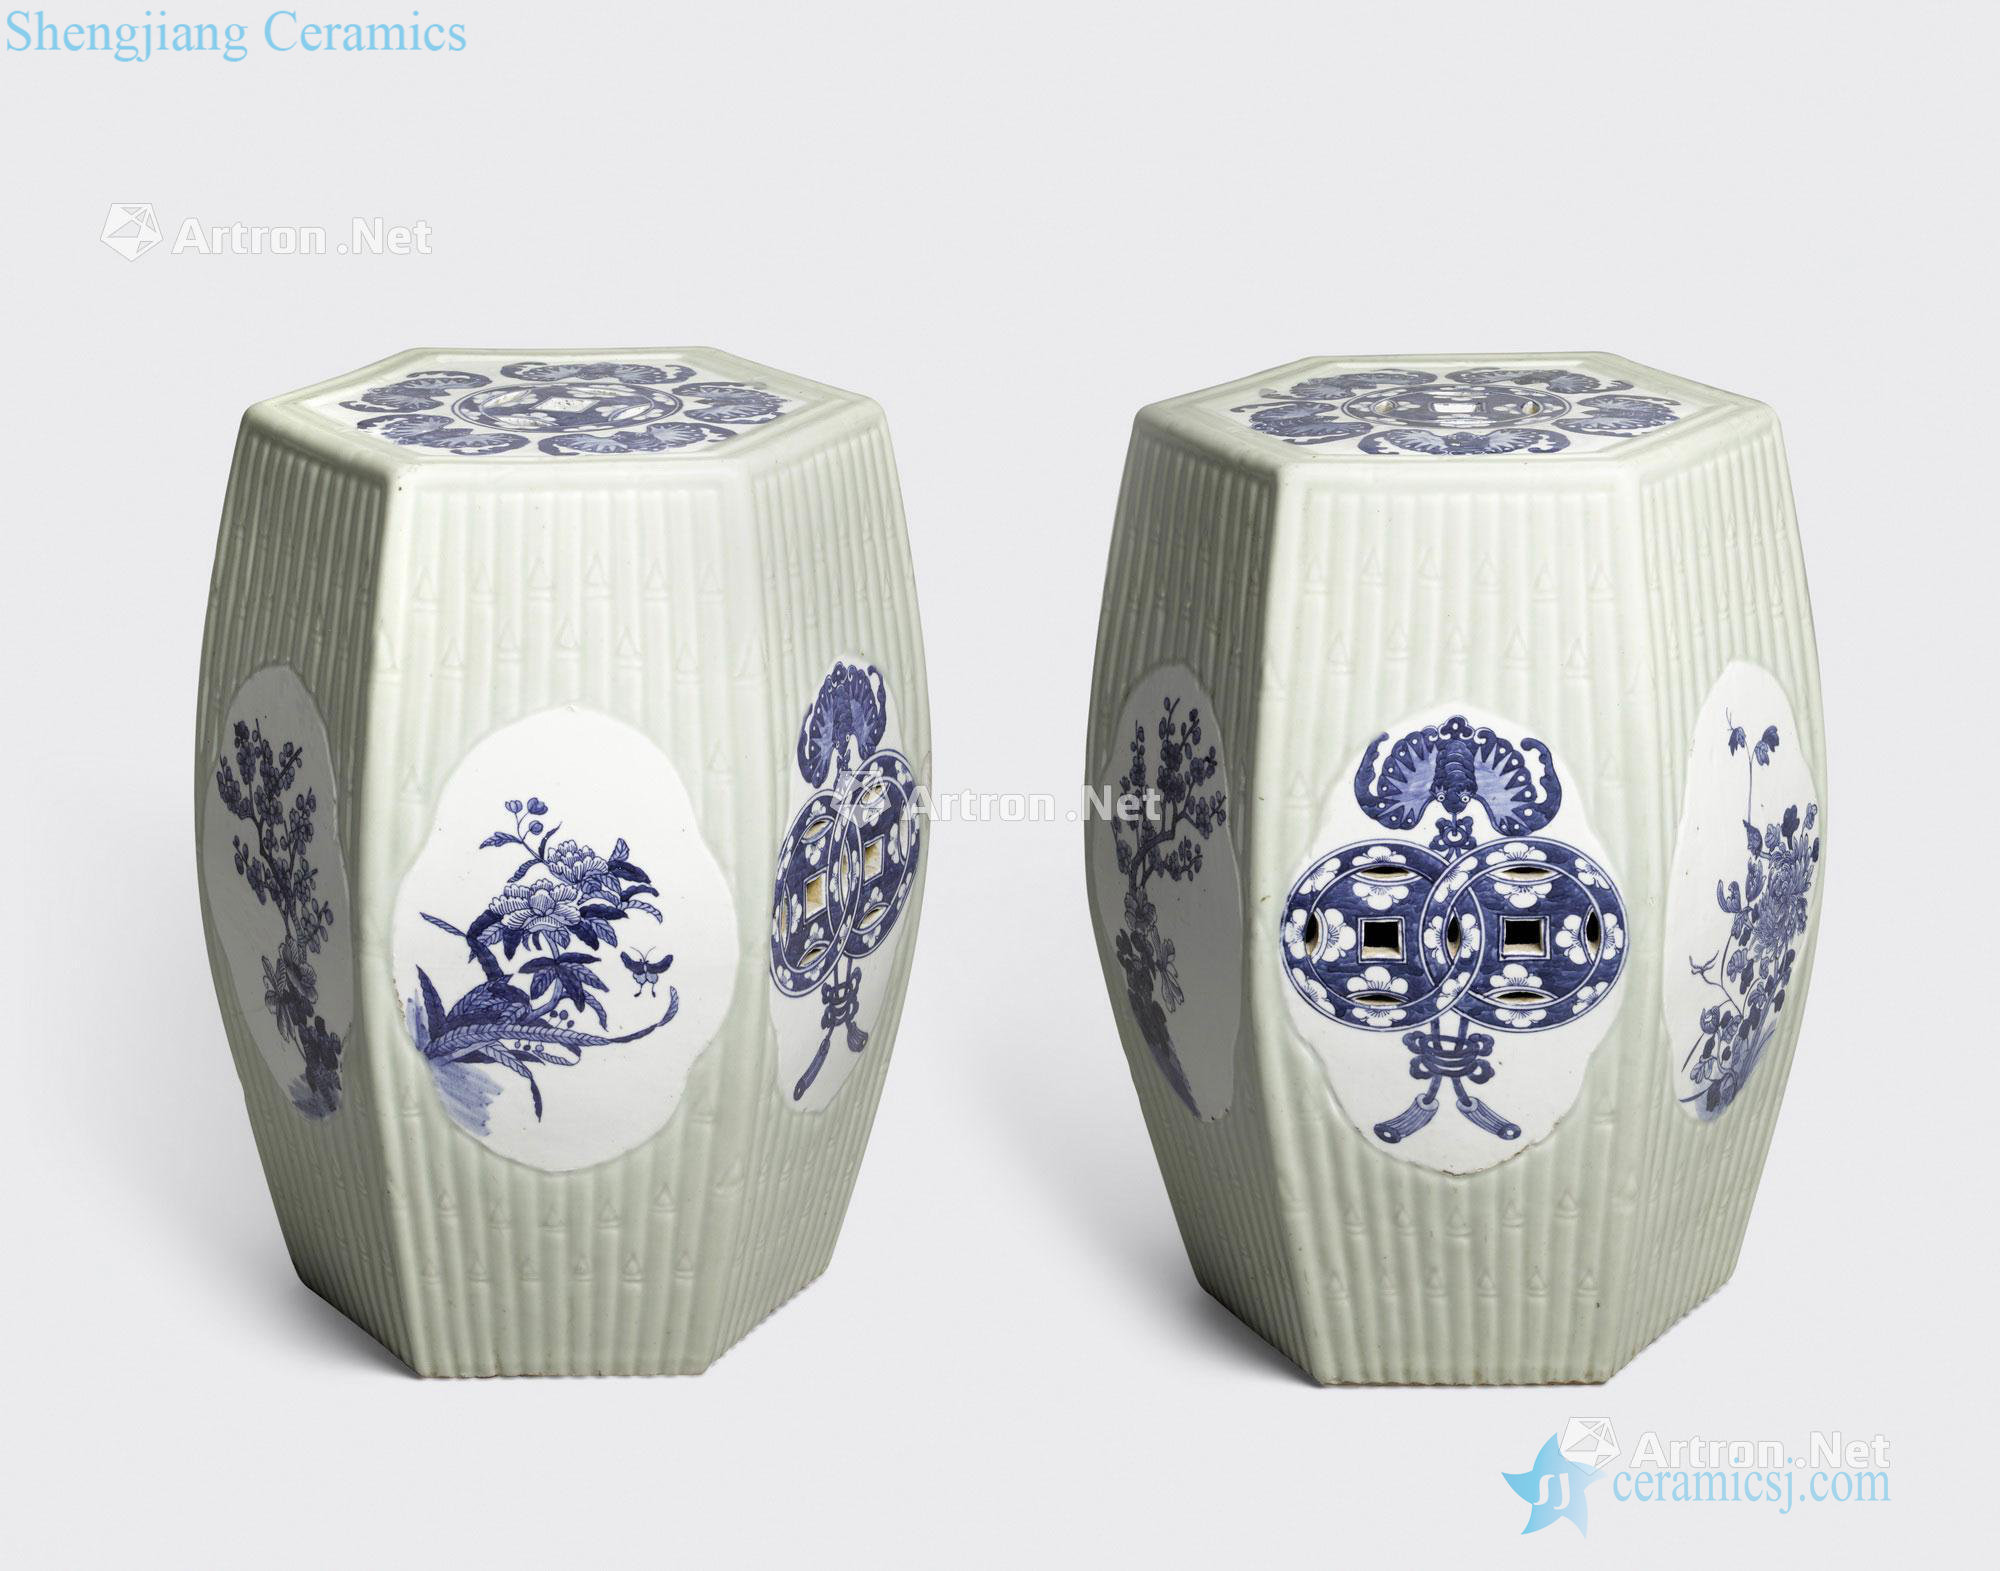 The 19 th century A PAIR OF CELADON GLAZED HEXAGONAL GARDEN SEATS WITH BLUE AND WHITE DECORATION